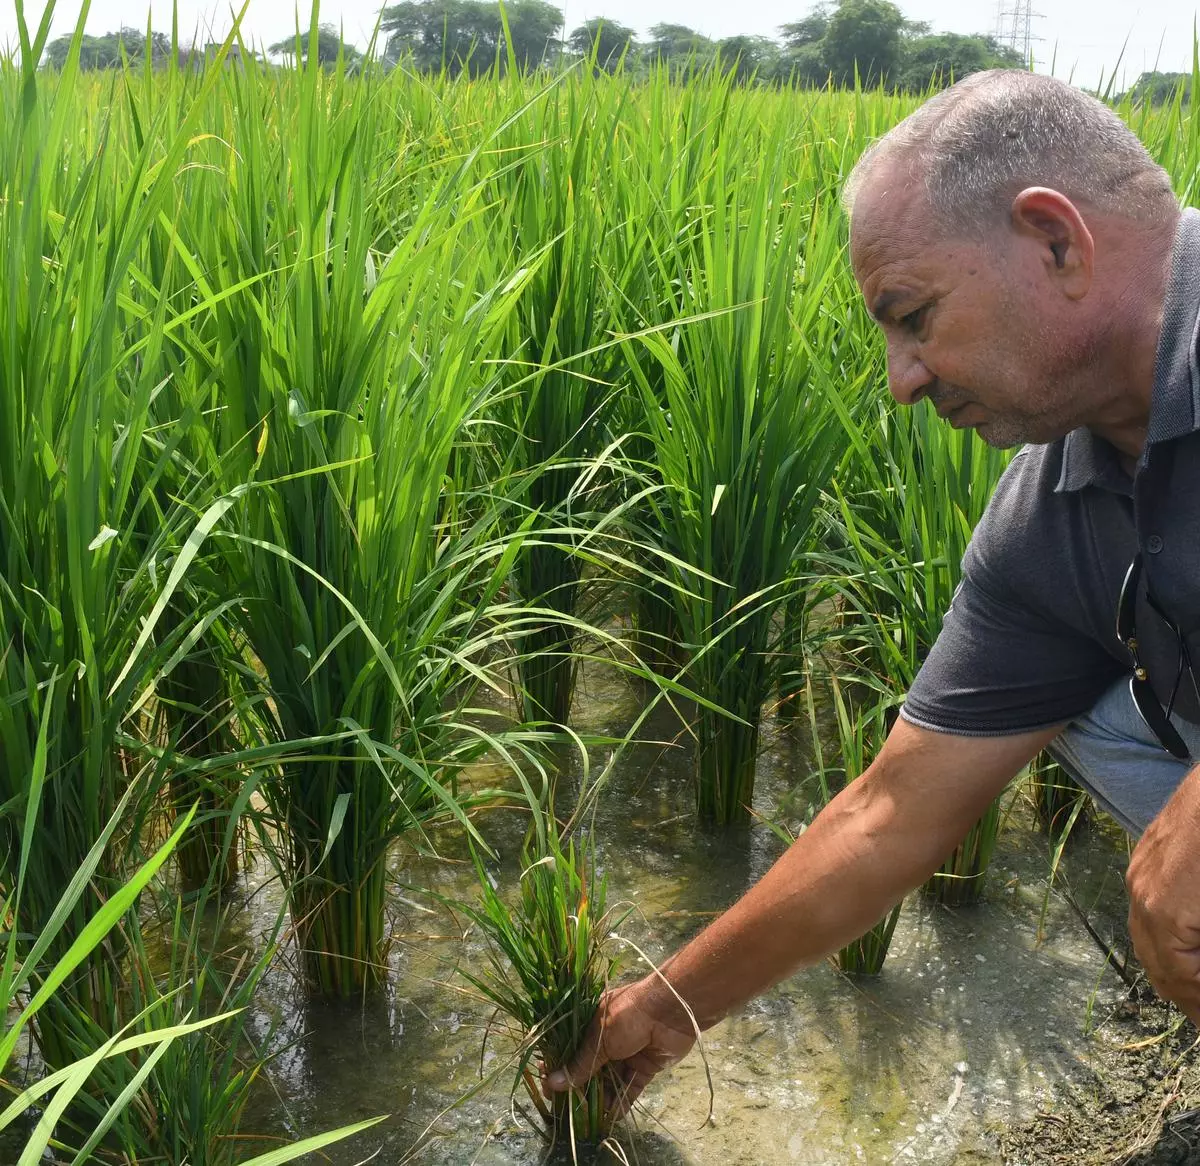 Ashok Kumar Antil of Deepalpur village in Sonipat, Haryana, has grown Basmati in 25 acres. He is worried after the unknown disease strikes every field staunting growth of some plants and prays God so that it does not spread further.at Sonipat, Haryana